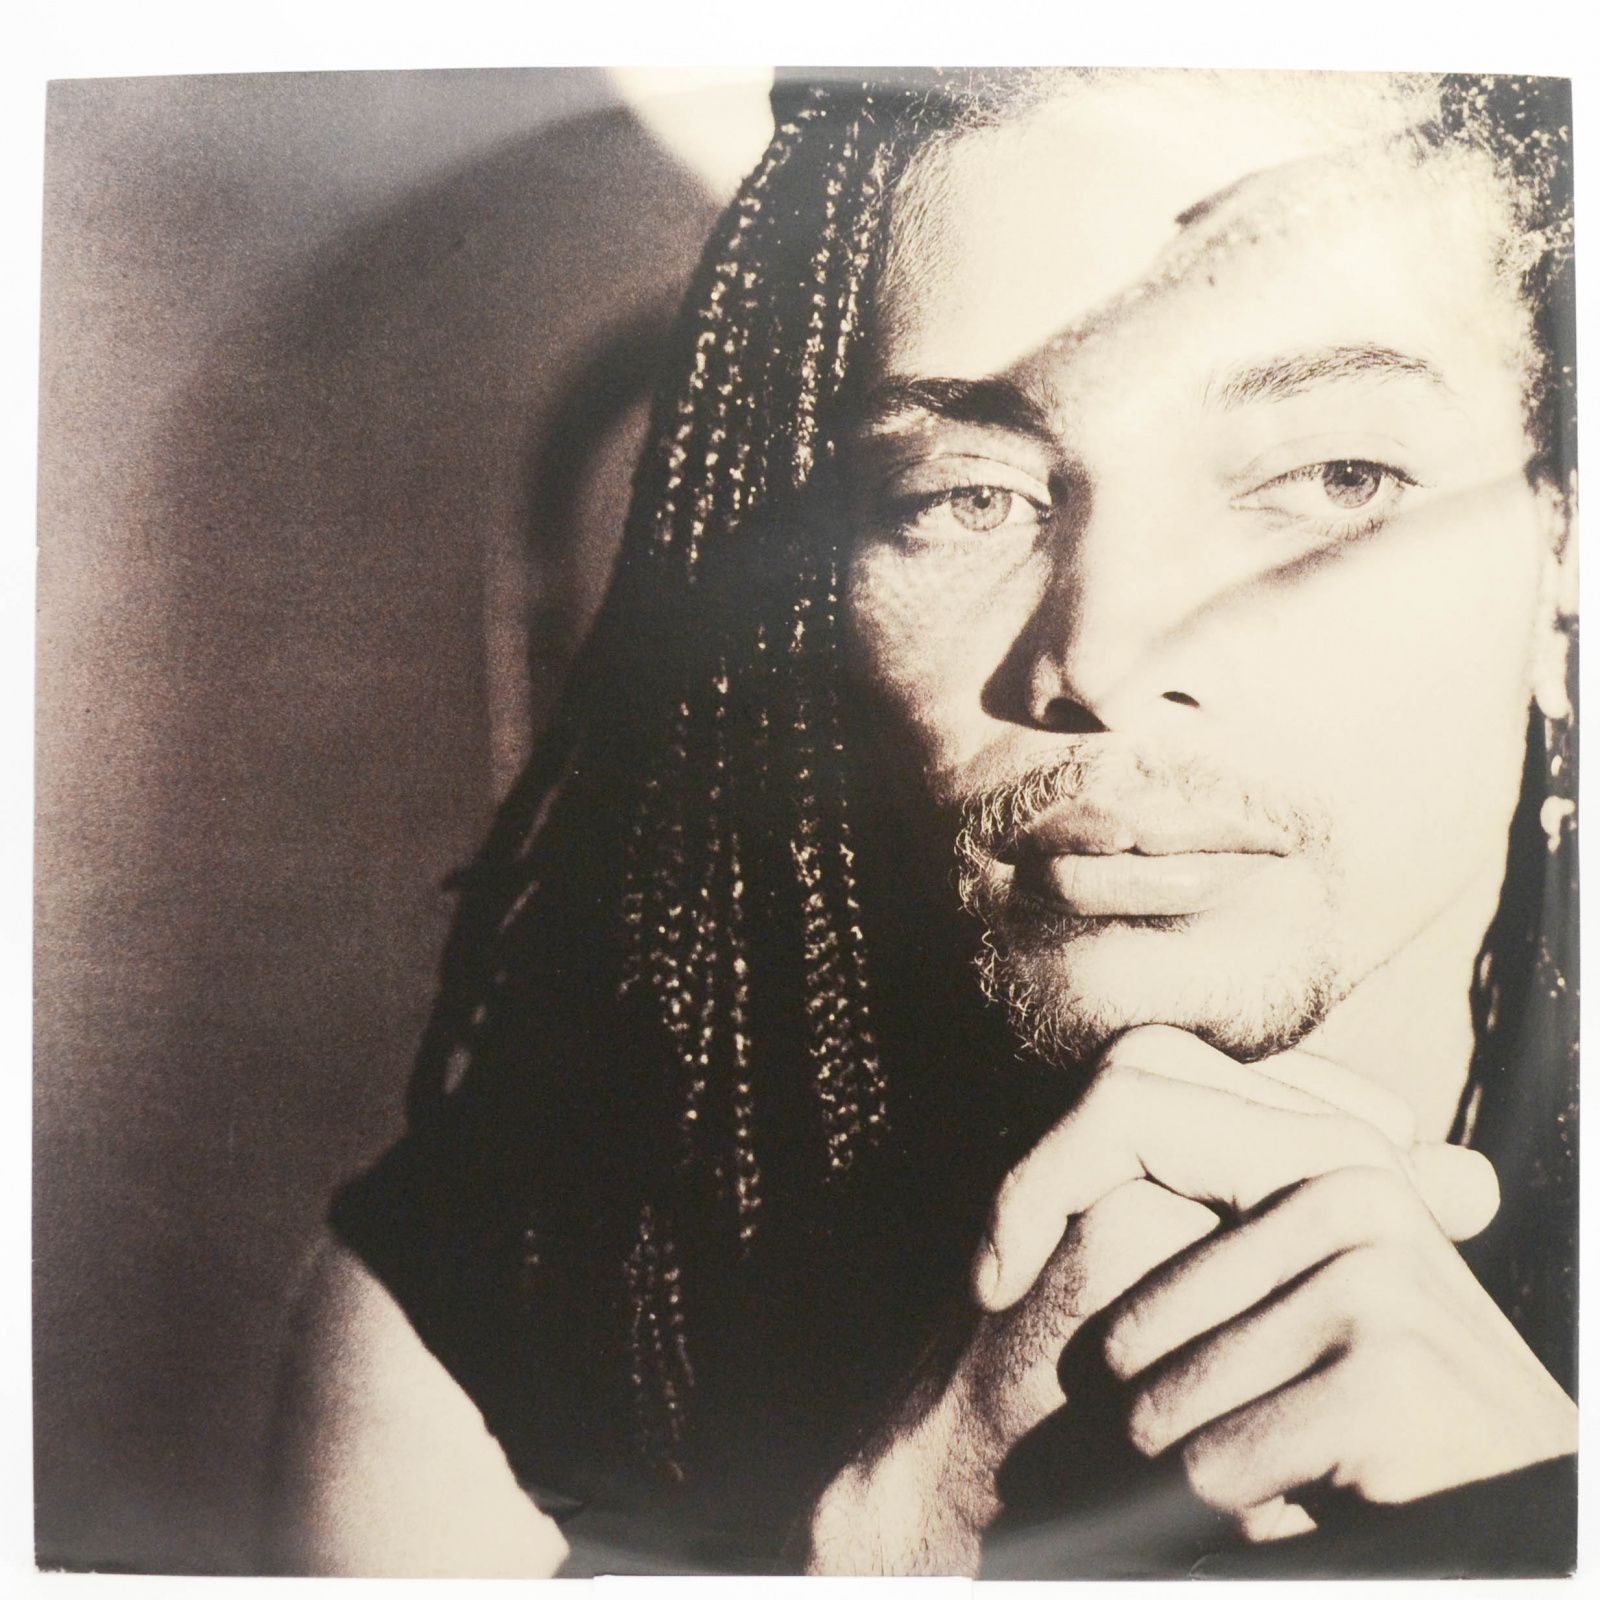 Terence Trent D'Arby — Terence Trent D'Arby's Neither Fish Nor Flesh: A Soundtrack Of Love, Faith, Hope And Destruction (UK, booklet), 1989